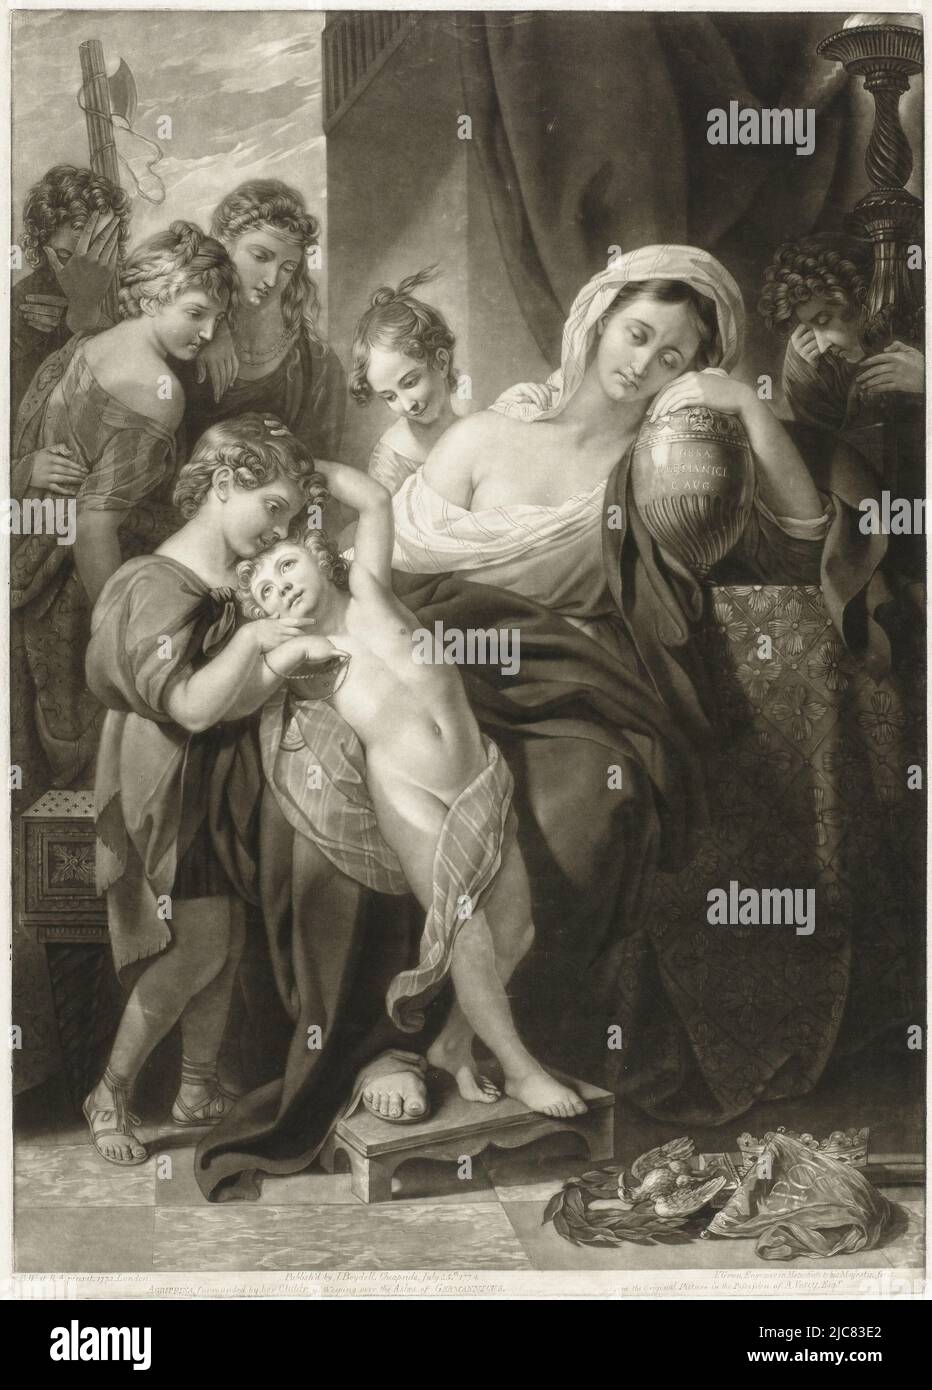 Agrippina the Elder mourning over the Ashes of Germanicus Agrippina, surrounded by her Children, weeping over the Ashes of Germannicus , print maker: Valentine Green, (mentioned on object), after: Benjamin West, (mentioned on object), publisher: John Boydell, (mentioned on object), London, Jul-1774, paper, etching, h 602 mm × w 429 mm Stock Photo